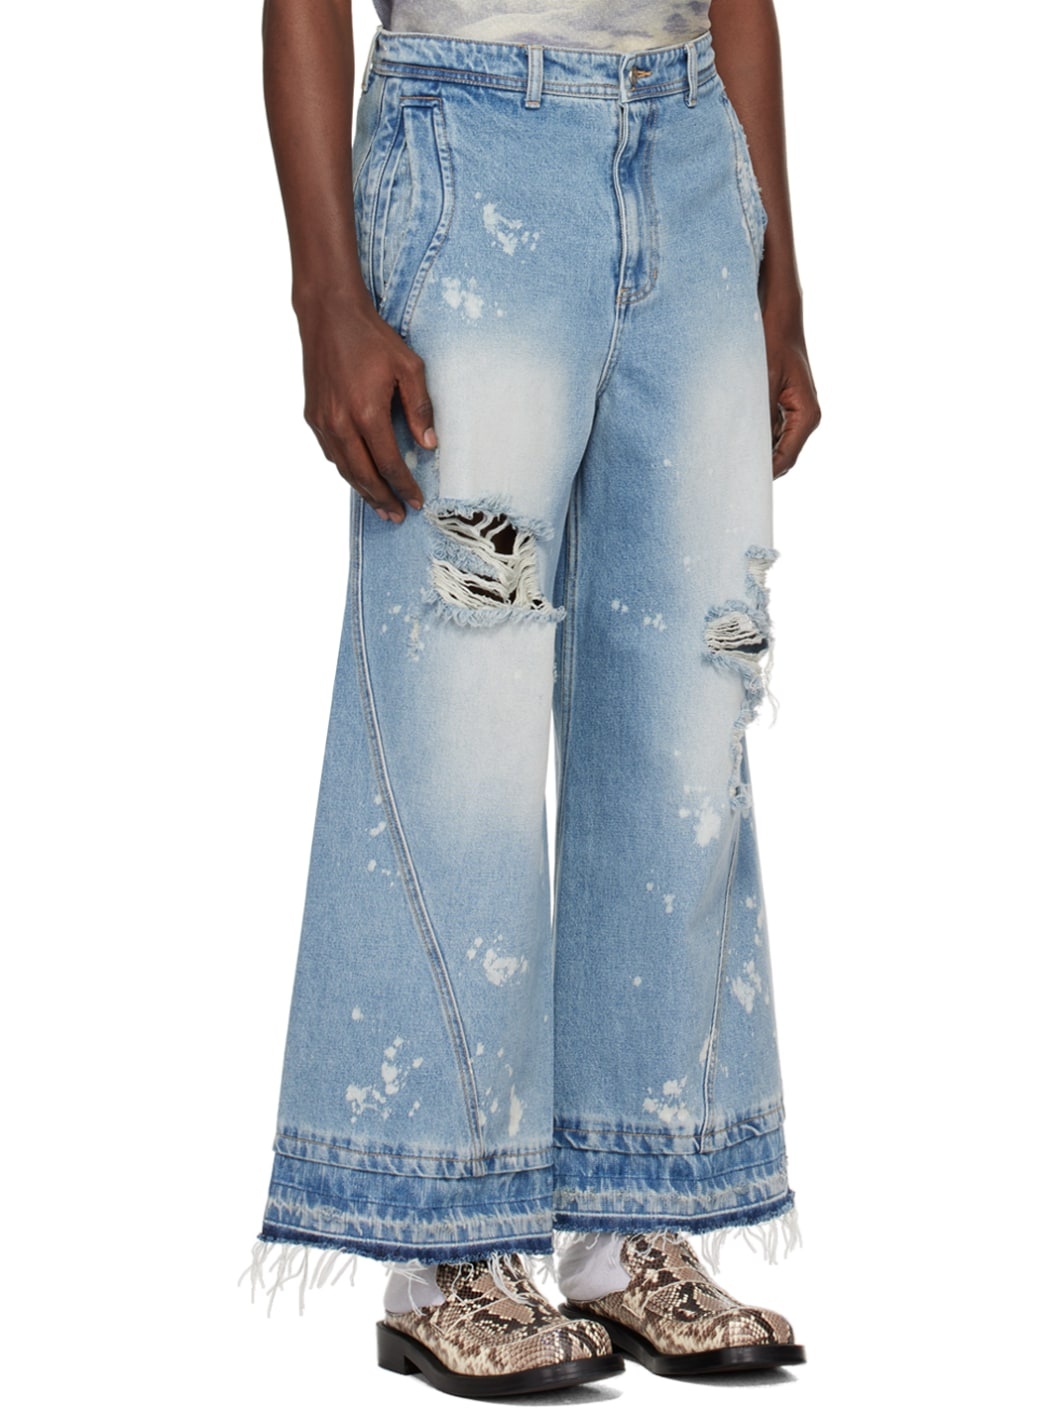 Blue Distressed Jeans - 2